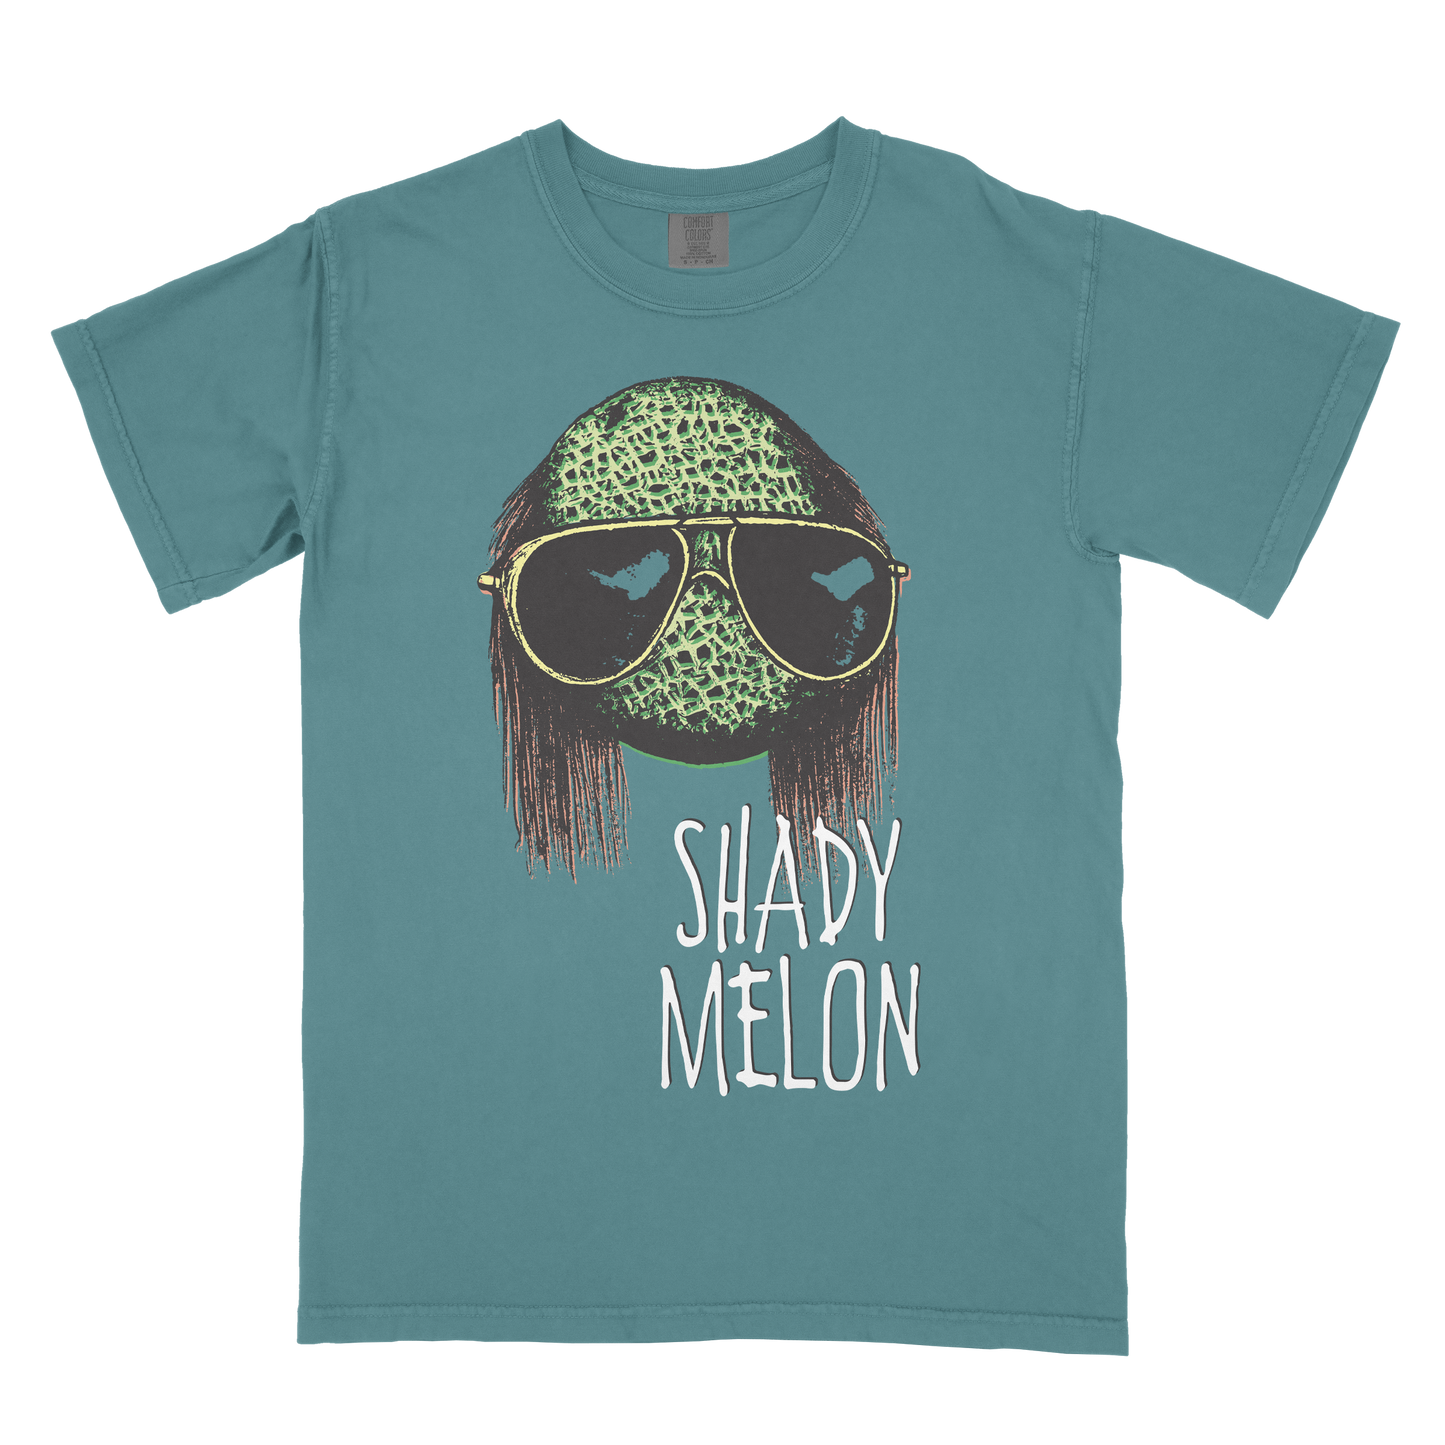 SHADY MELON - LIMITED TIME ONLY!